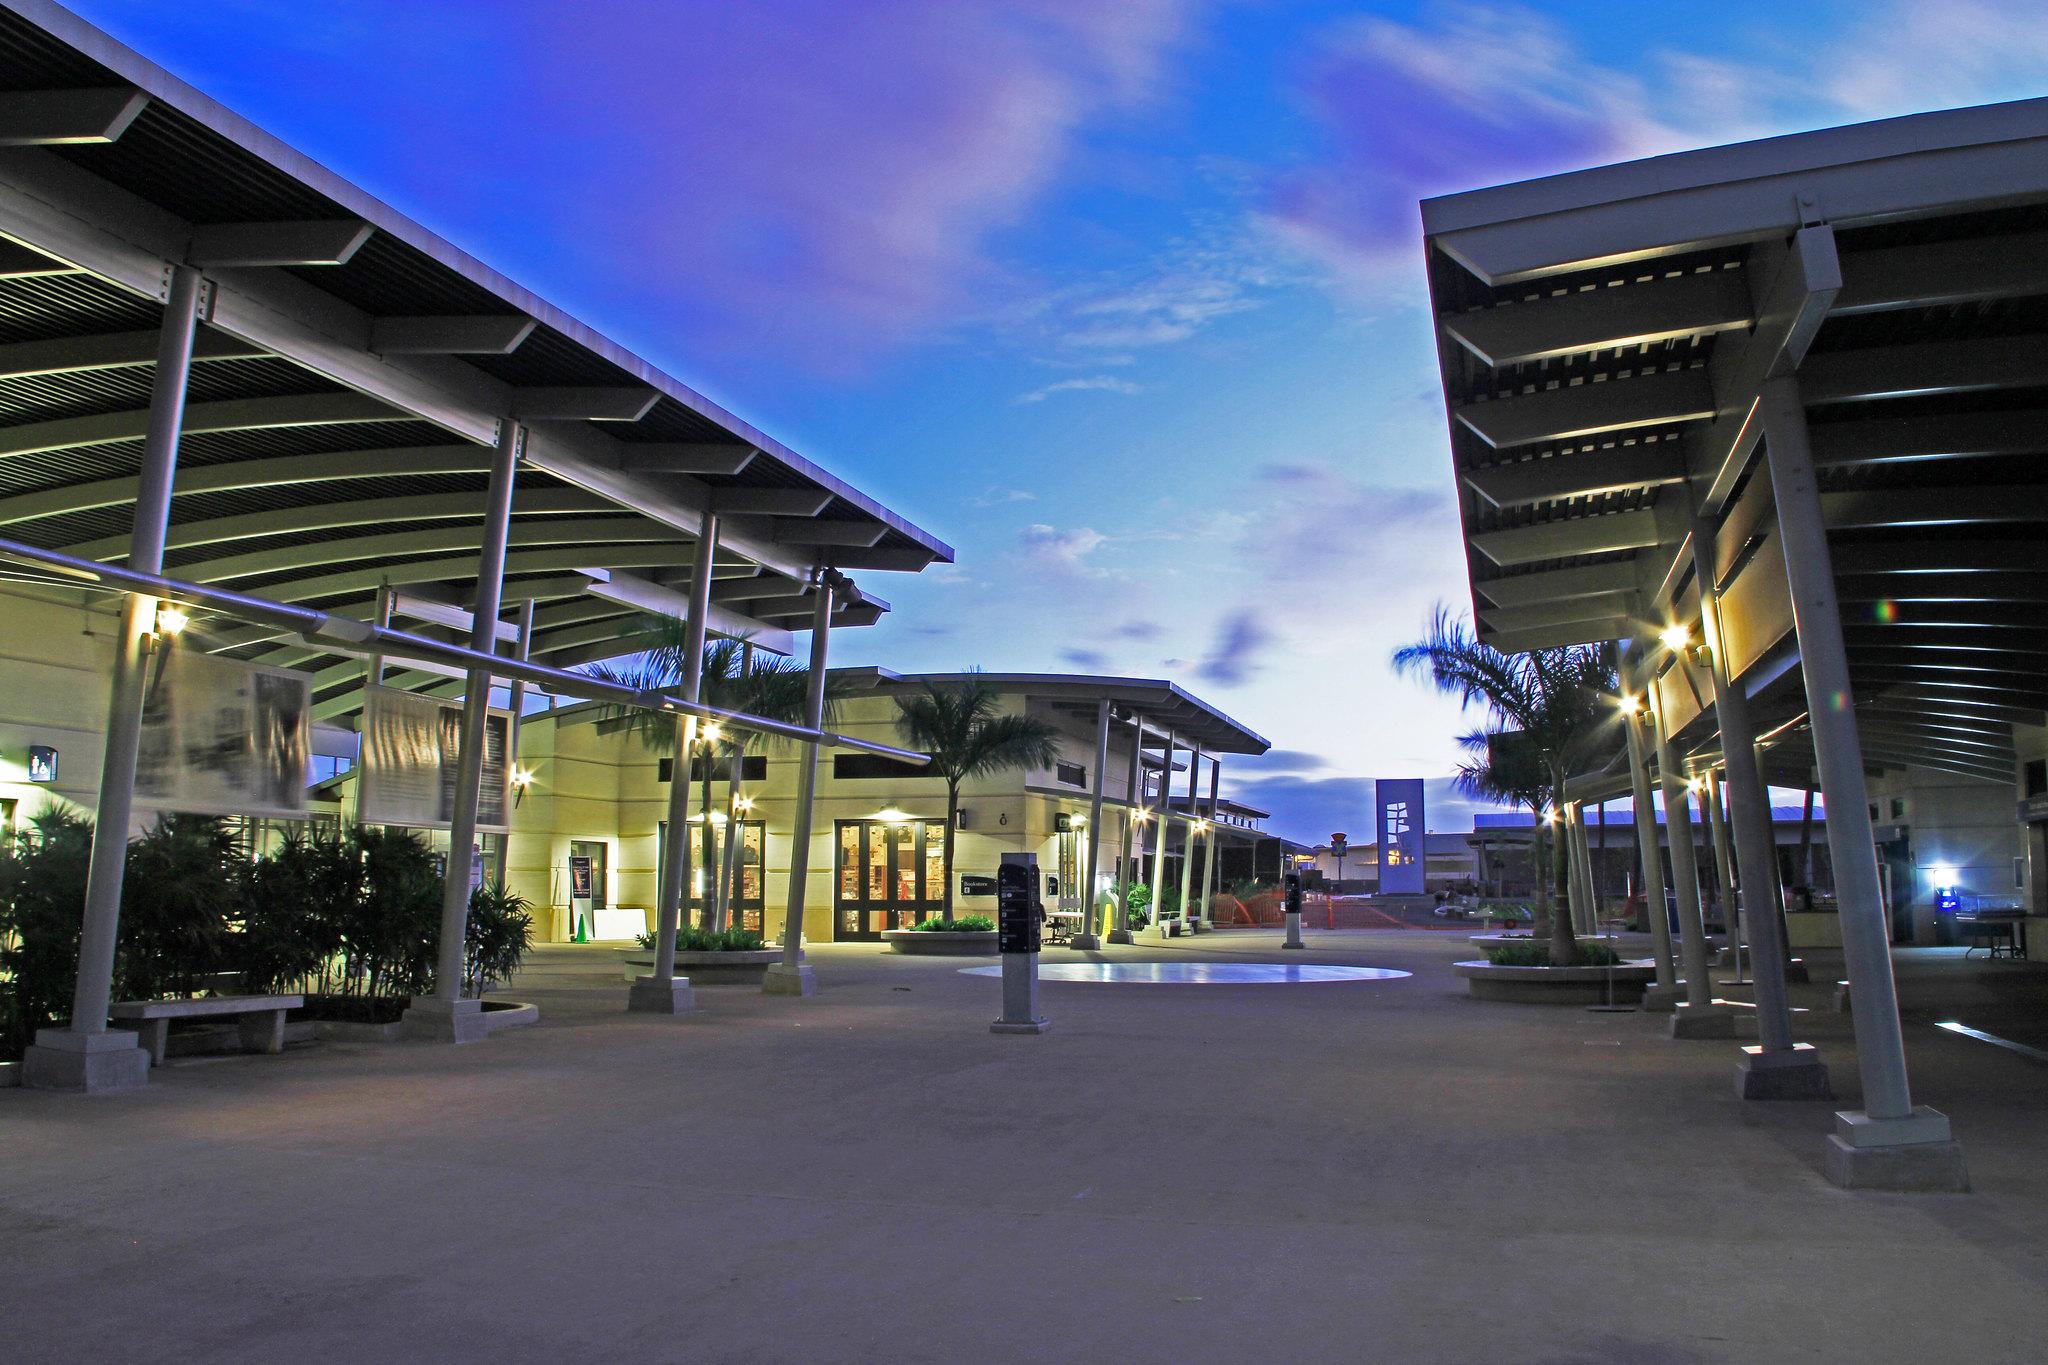 An evening photo of the Pearl Harbor Visitor Center Complex looking towards the museums.